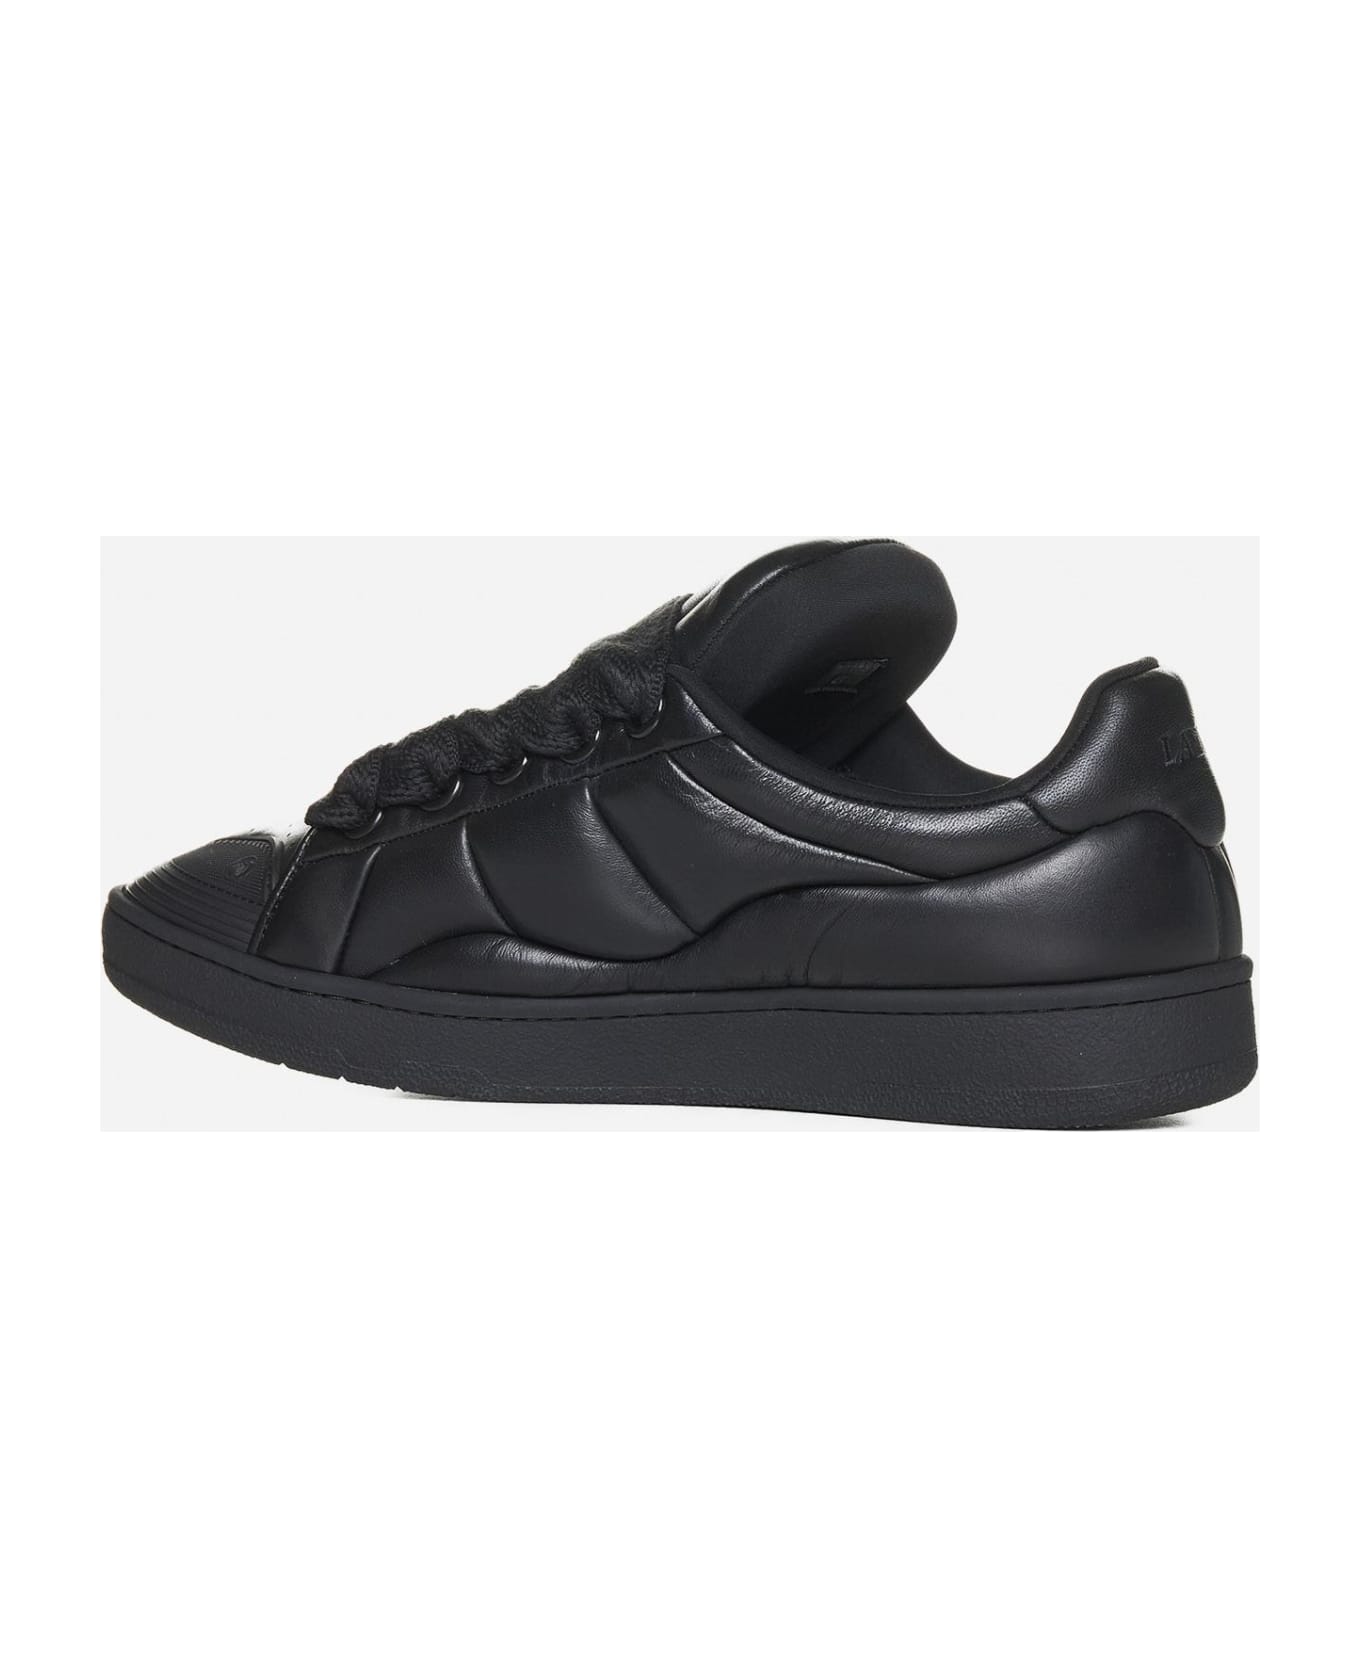 Lanvin Curb Xl Low-top Leather Sneakers - Black スニーカー